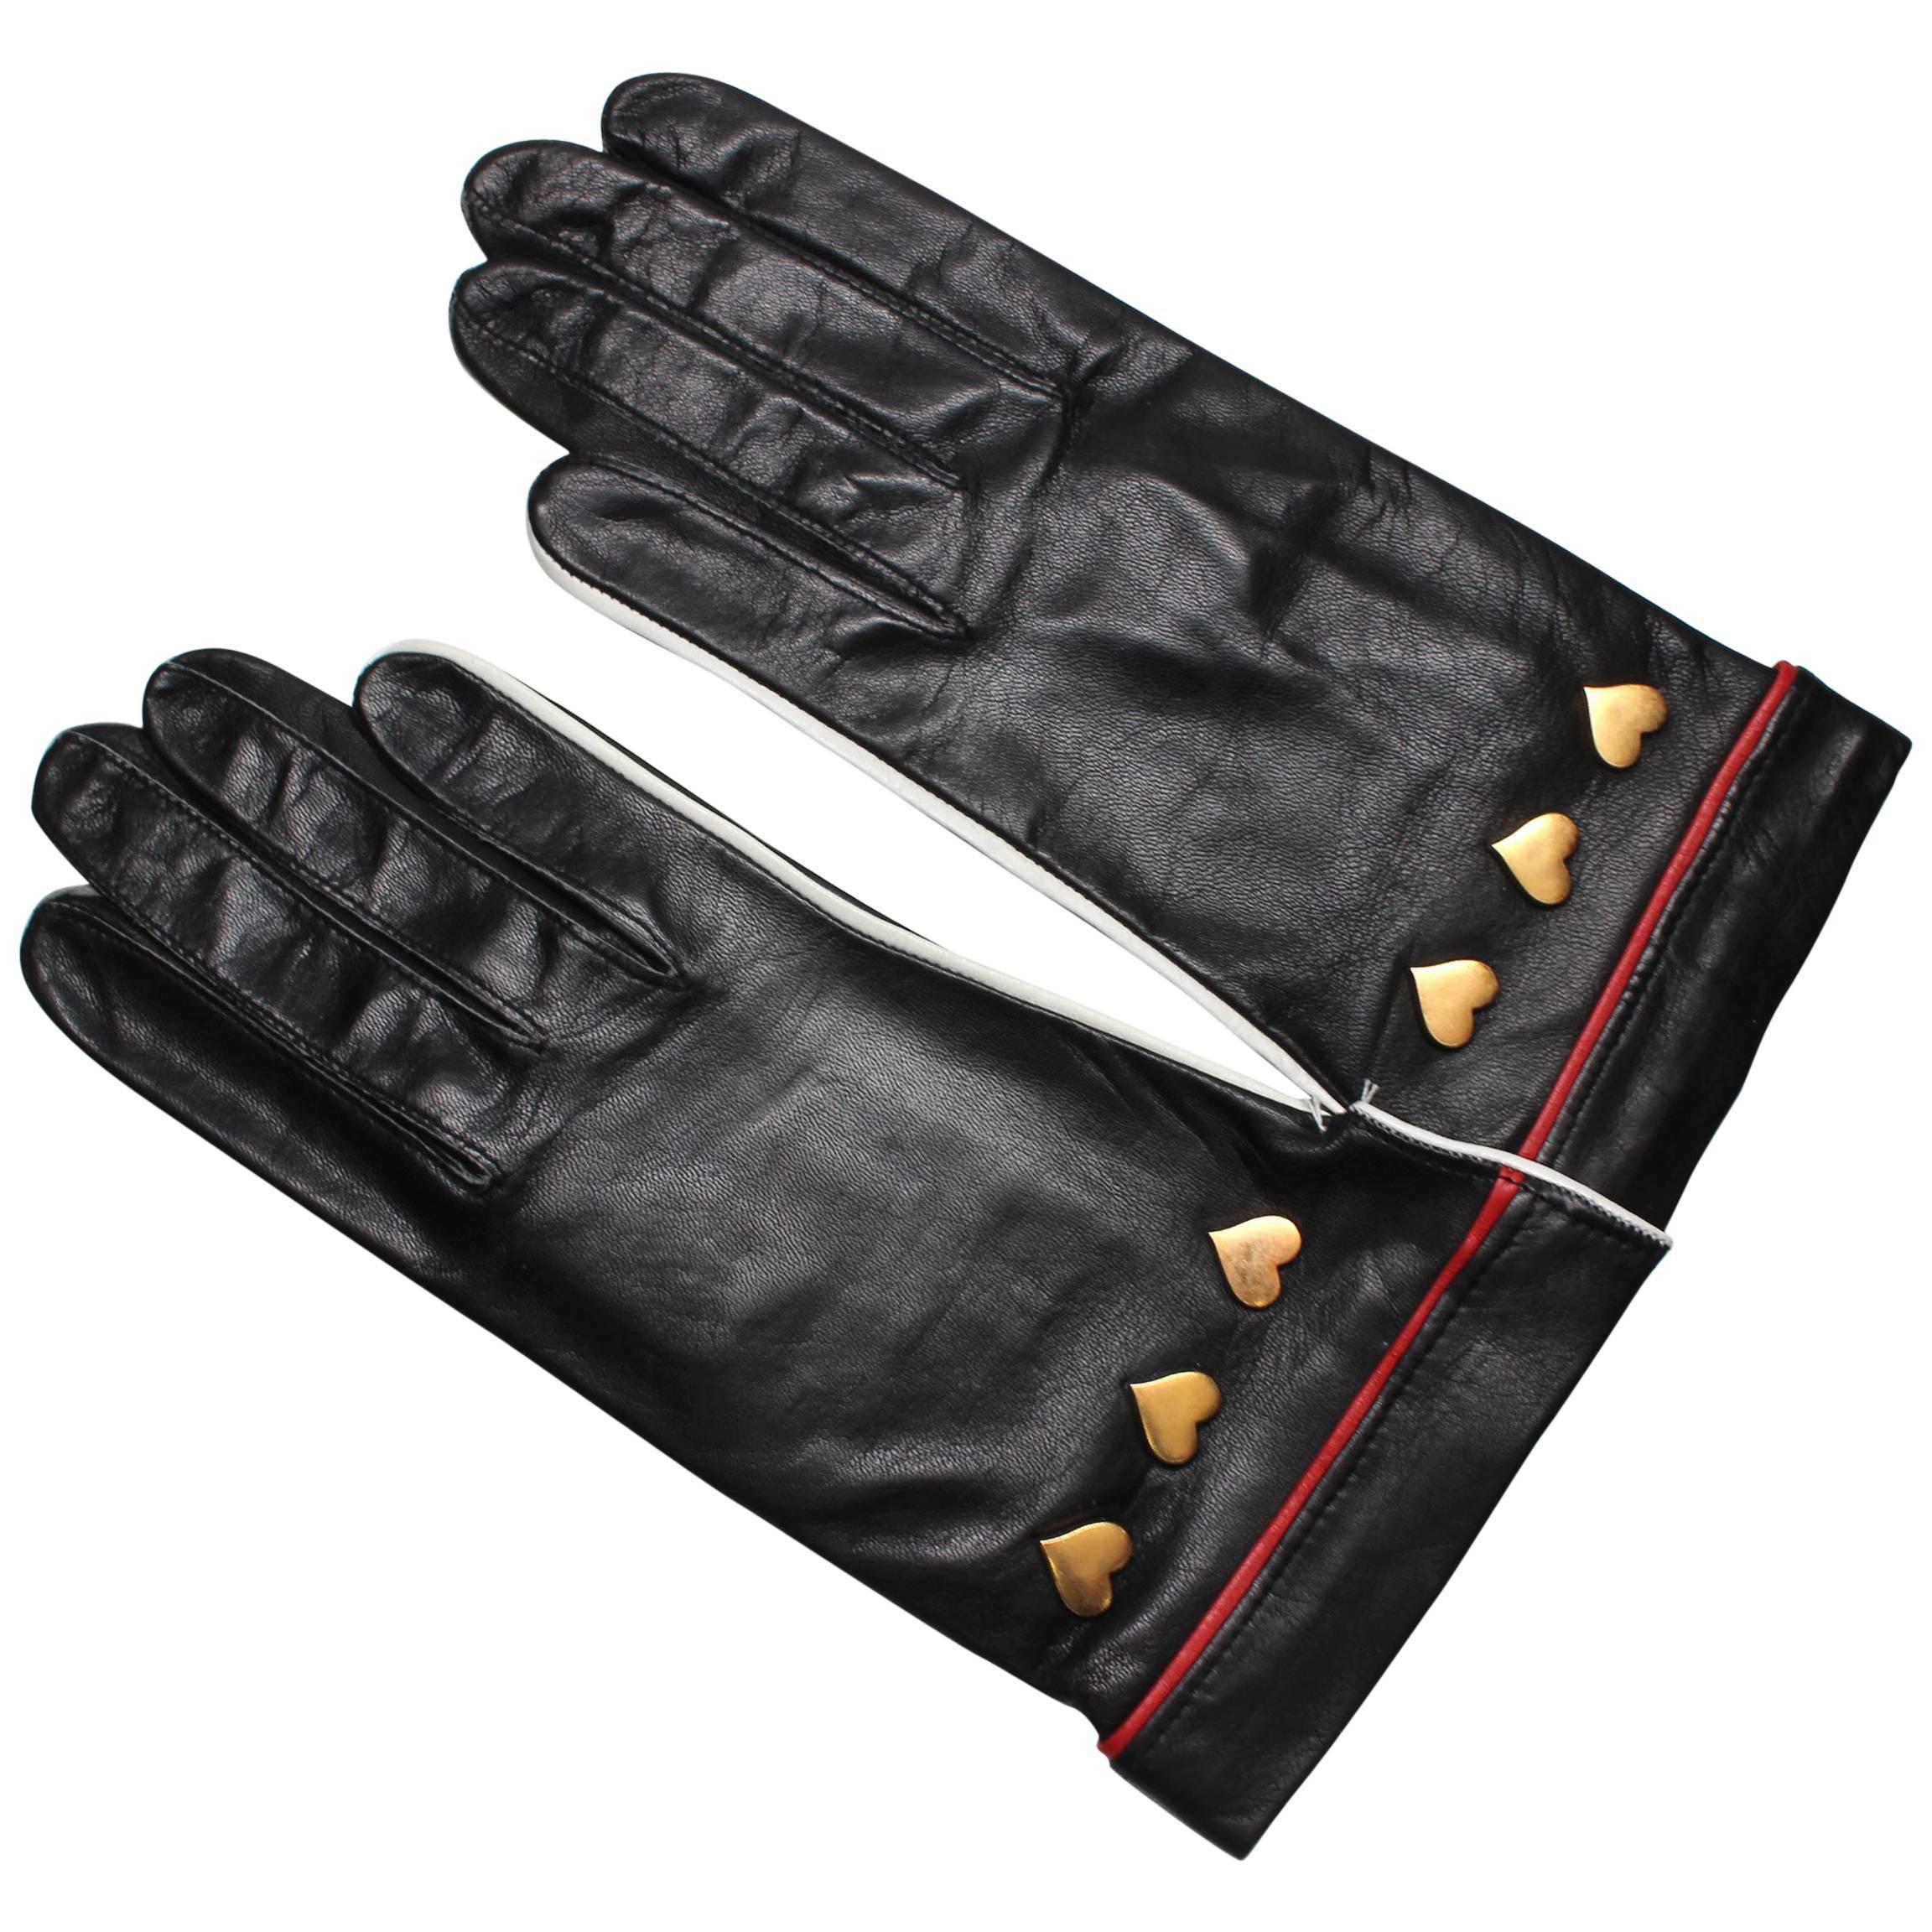 Vintage 1980s Escada Black Leather Gloves with Heart Studs, Never Worn